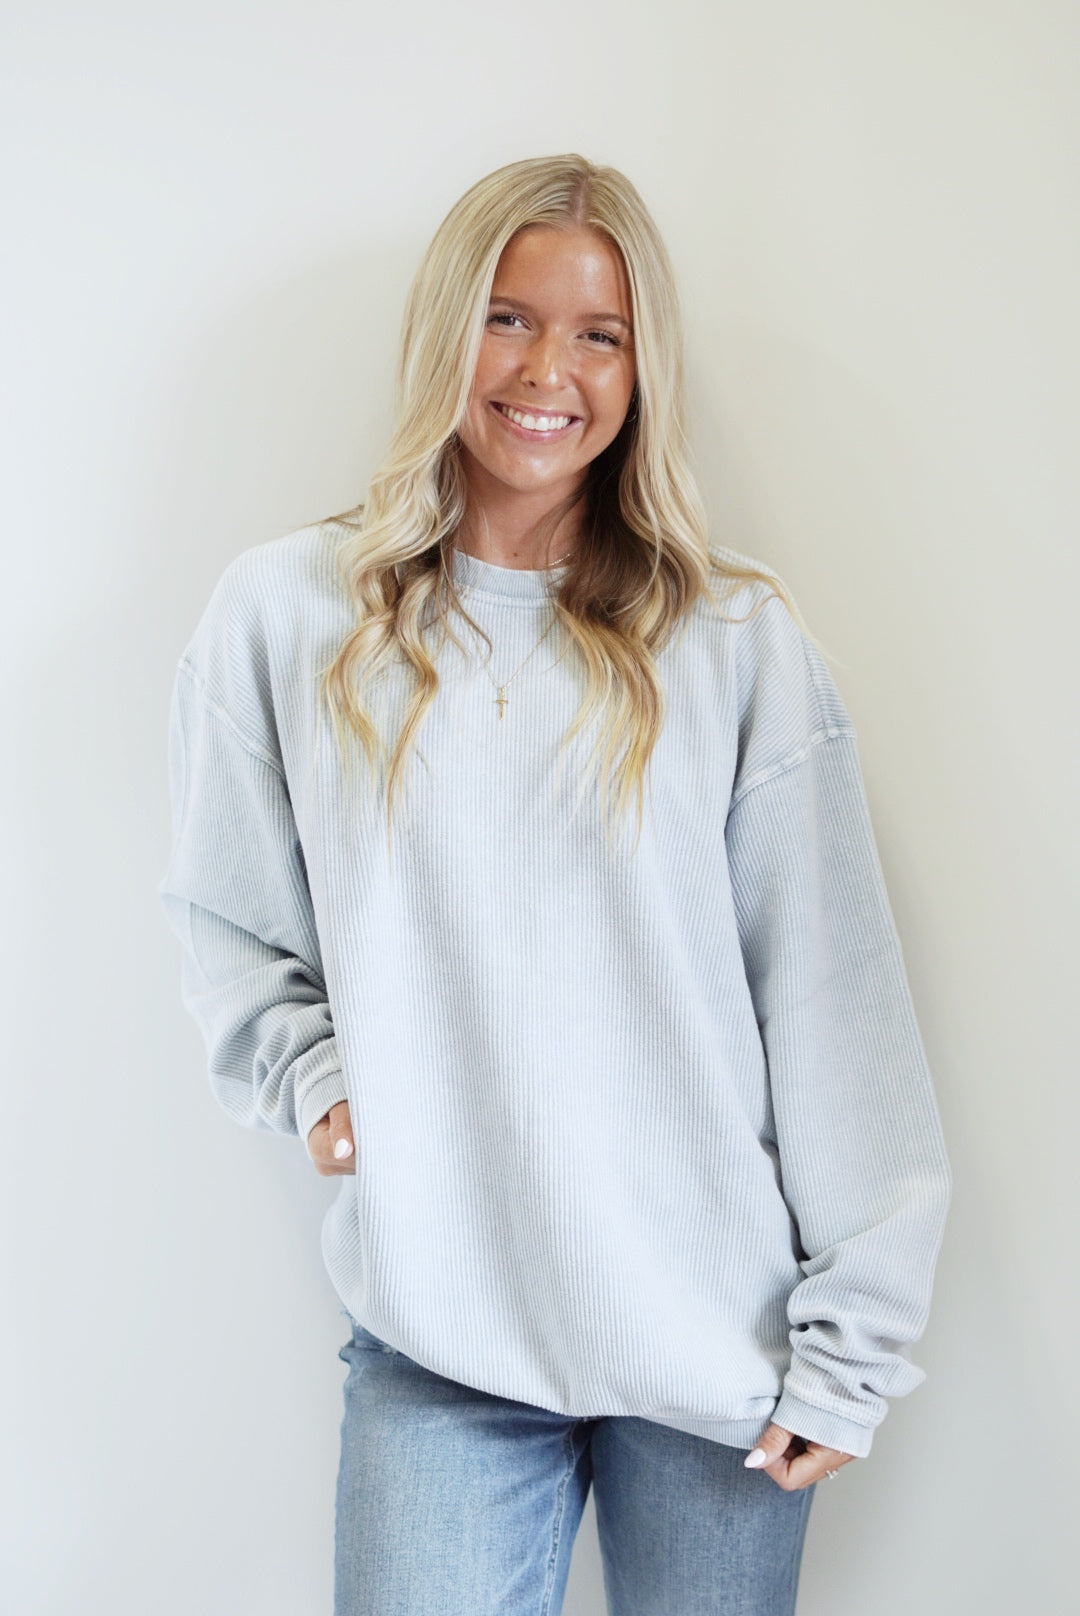 Calla Corded Crew Everyday Sweatshirt Crew Neckline Long Sleeve Corded Material Colors: Pink, Ivory, Sky Blue Full Length Relaxed Fit 100% Cotton Care: Machine Wash Carefully in Cold Water, Lay Flat to Dry